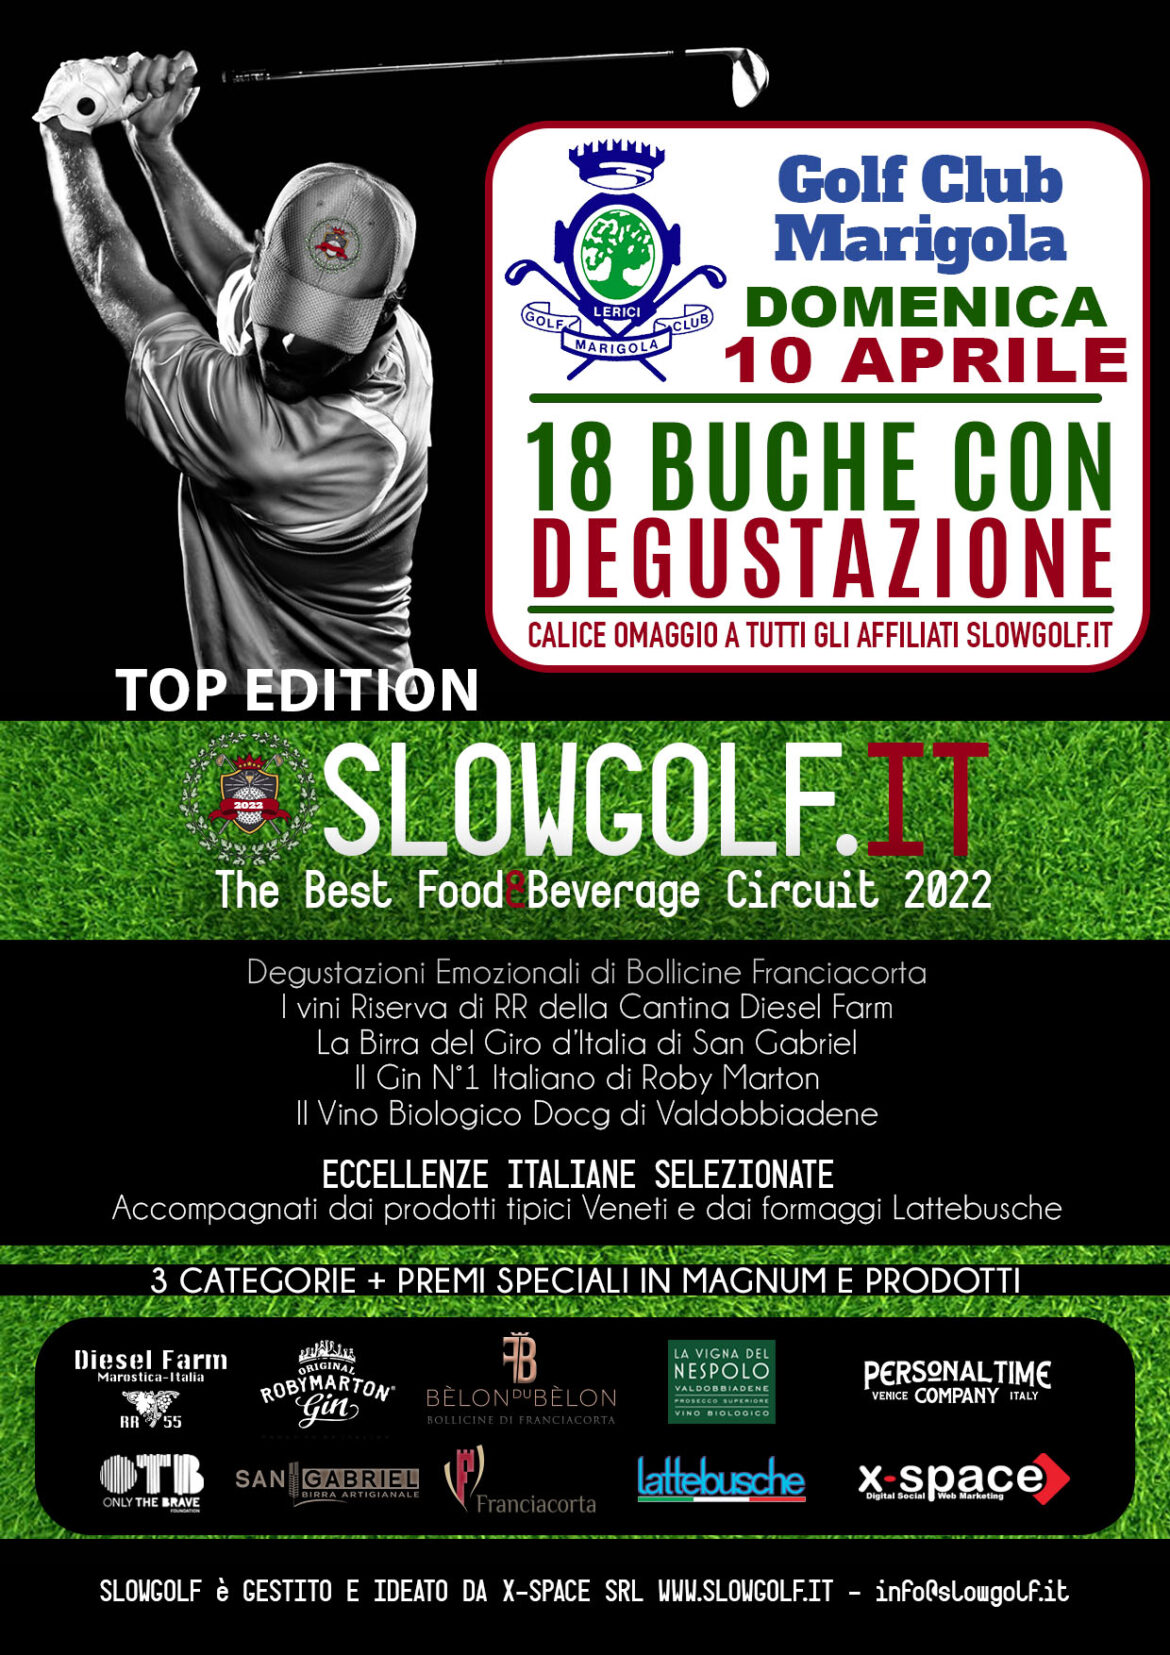 SLOWGOLF.IT The Best Food&Beverage Golf Circuit 2022- domenica 10 aprile 2022